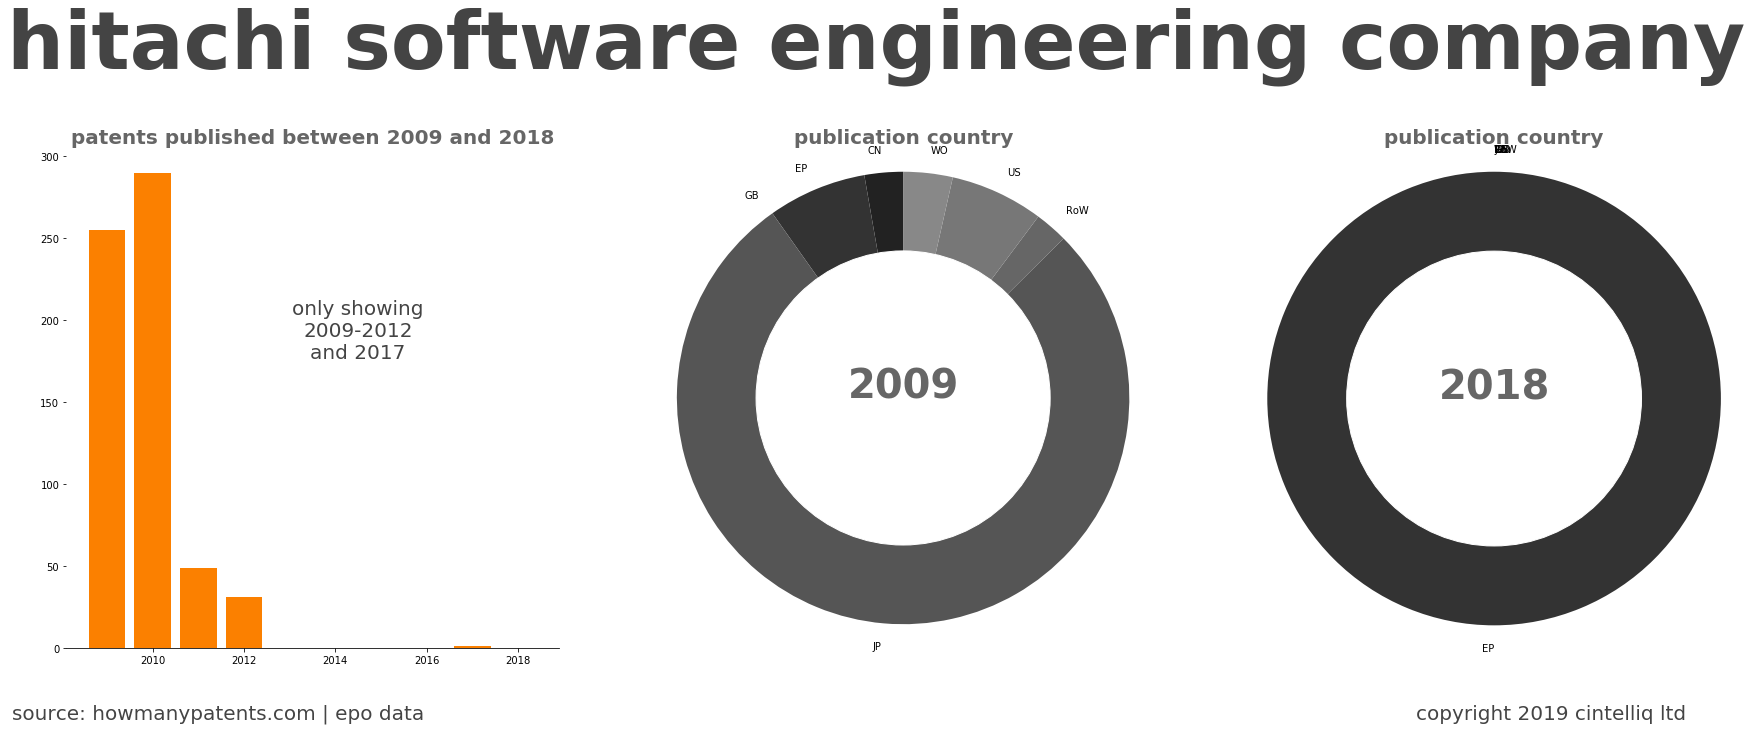 summary of patents for Hitachi Software Engineering Company